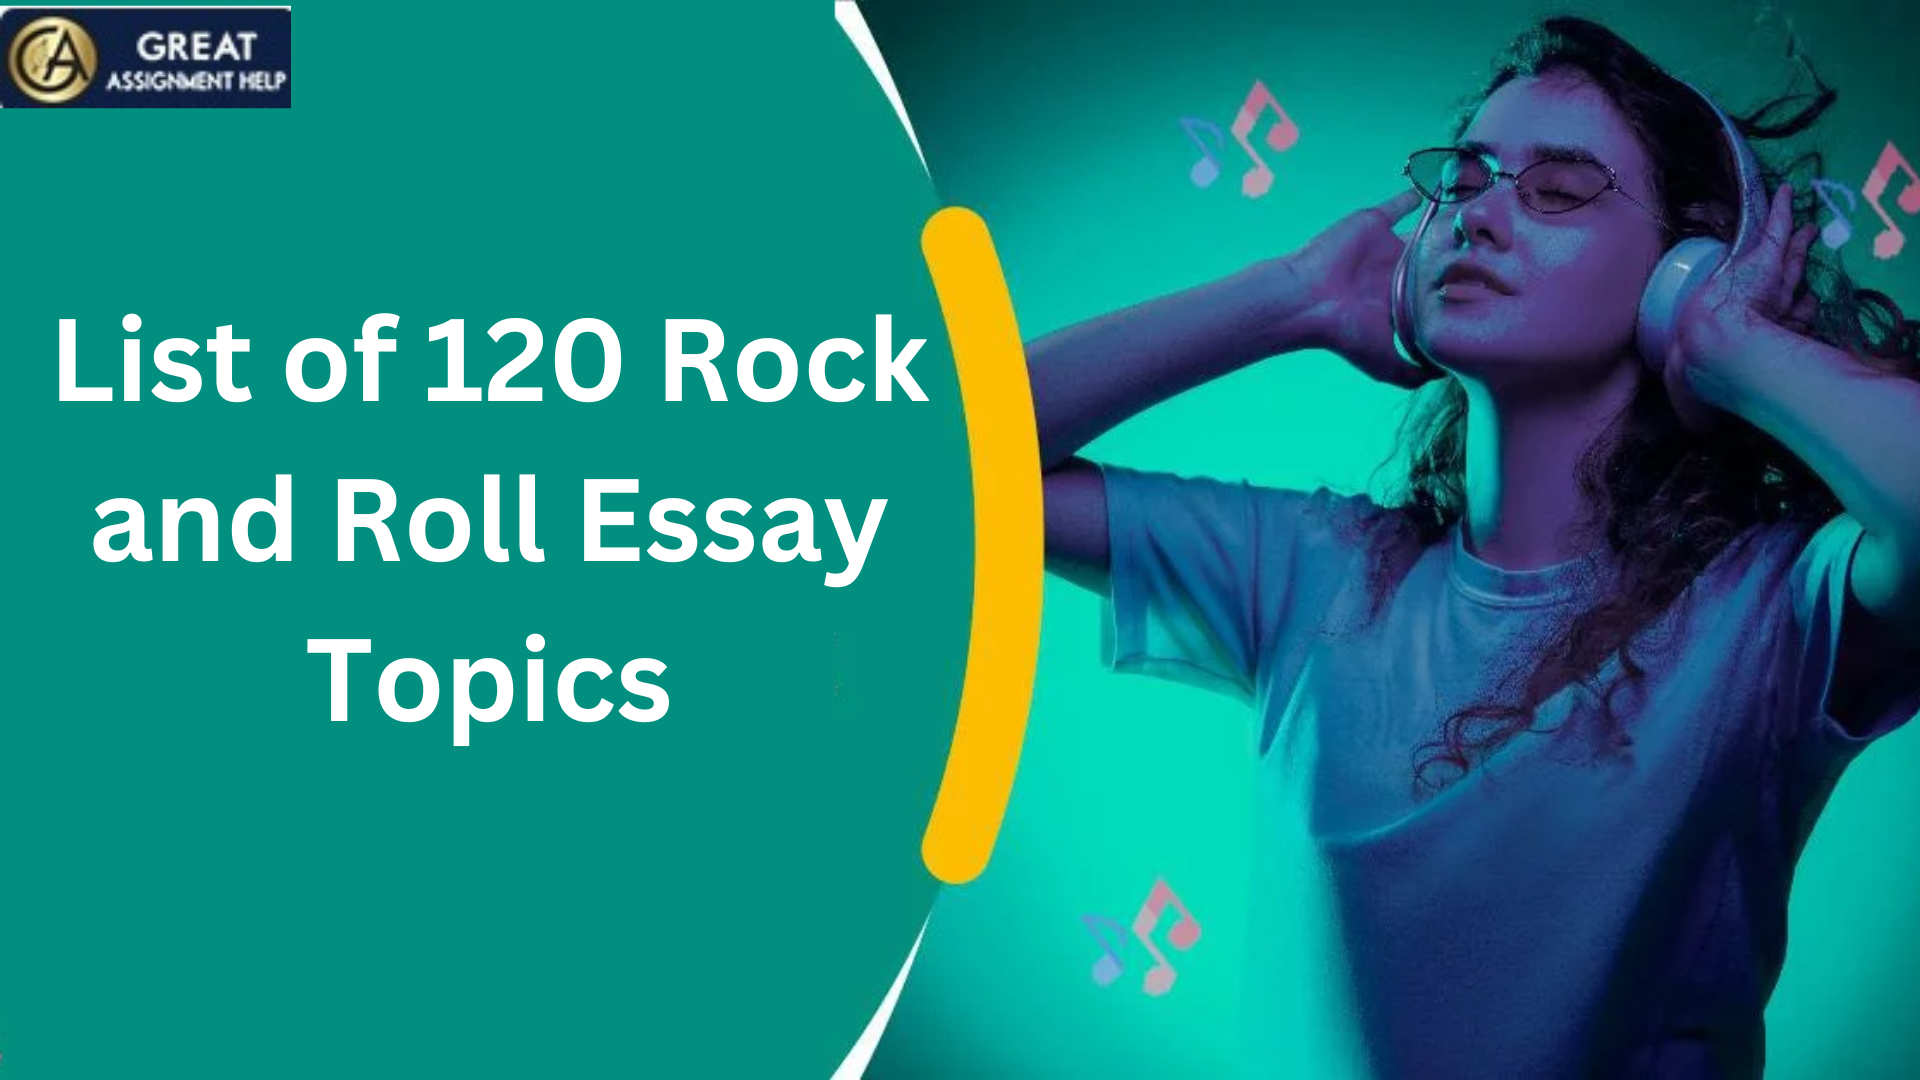 research topics for rock music